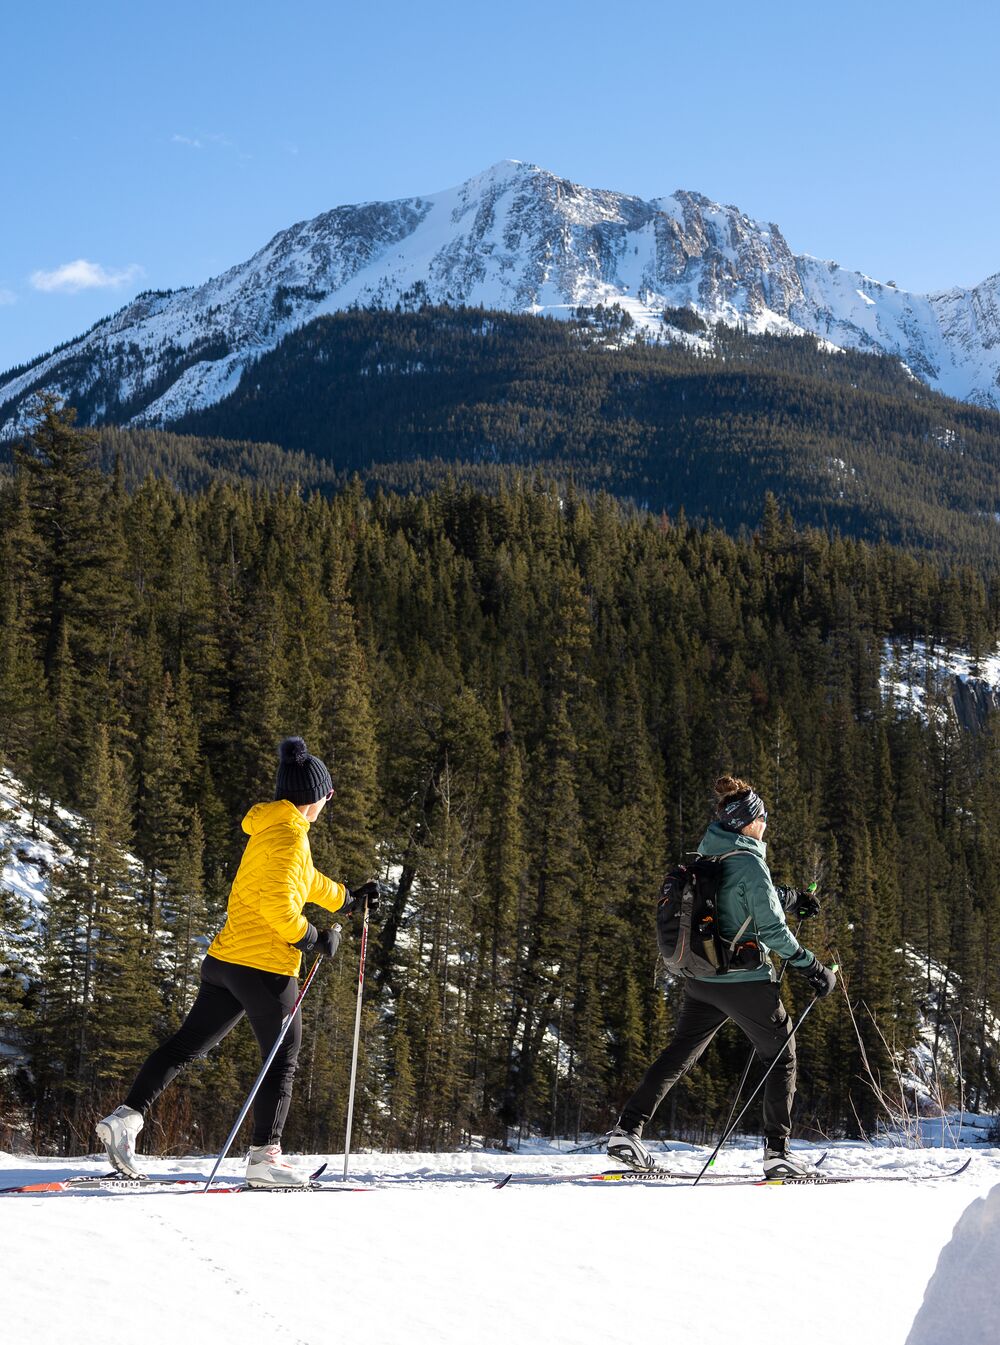 Two people cross country ski on a sunny day in Banff National Park.